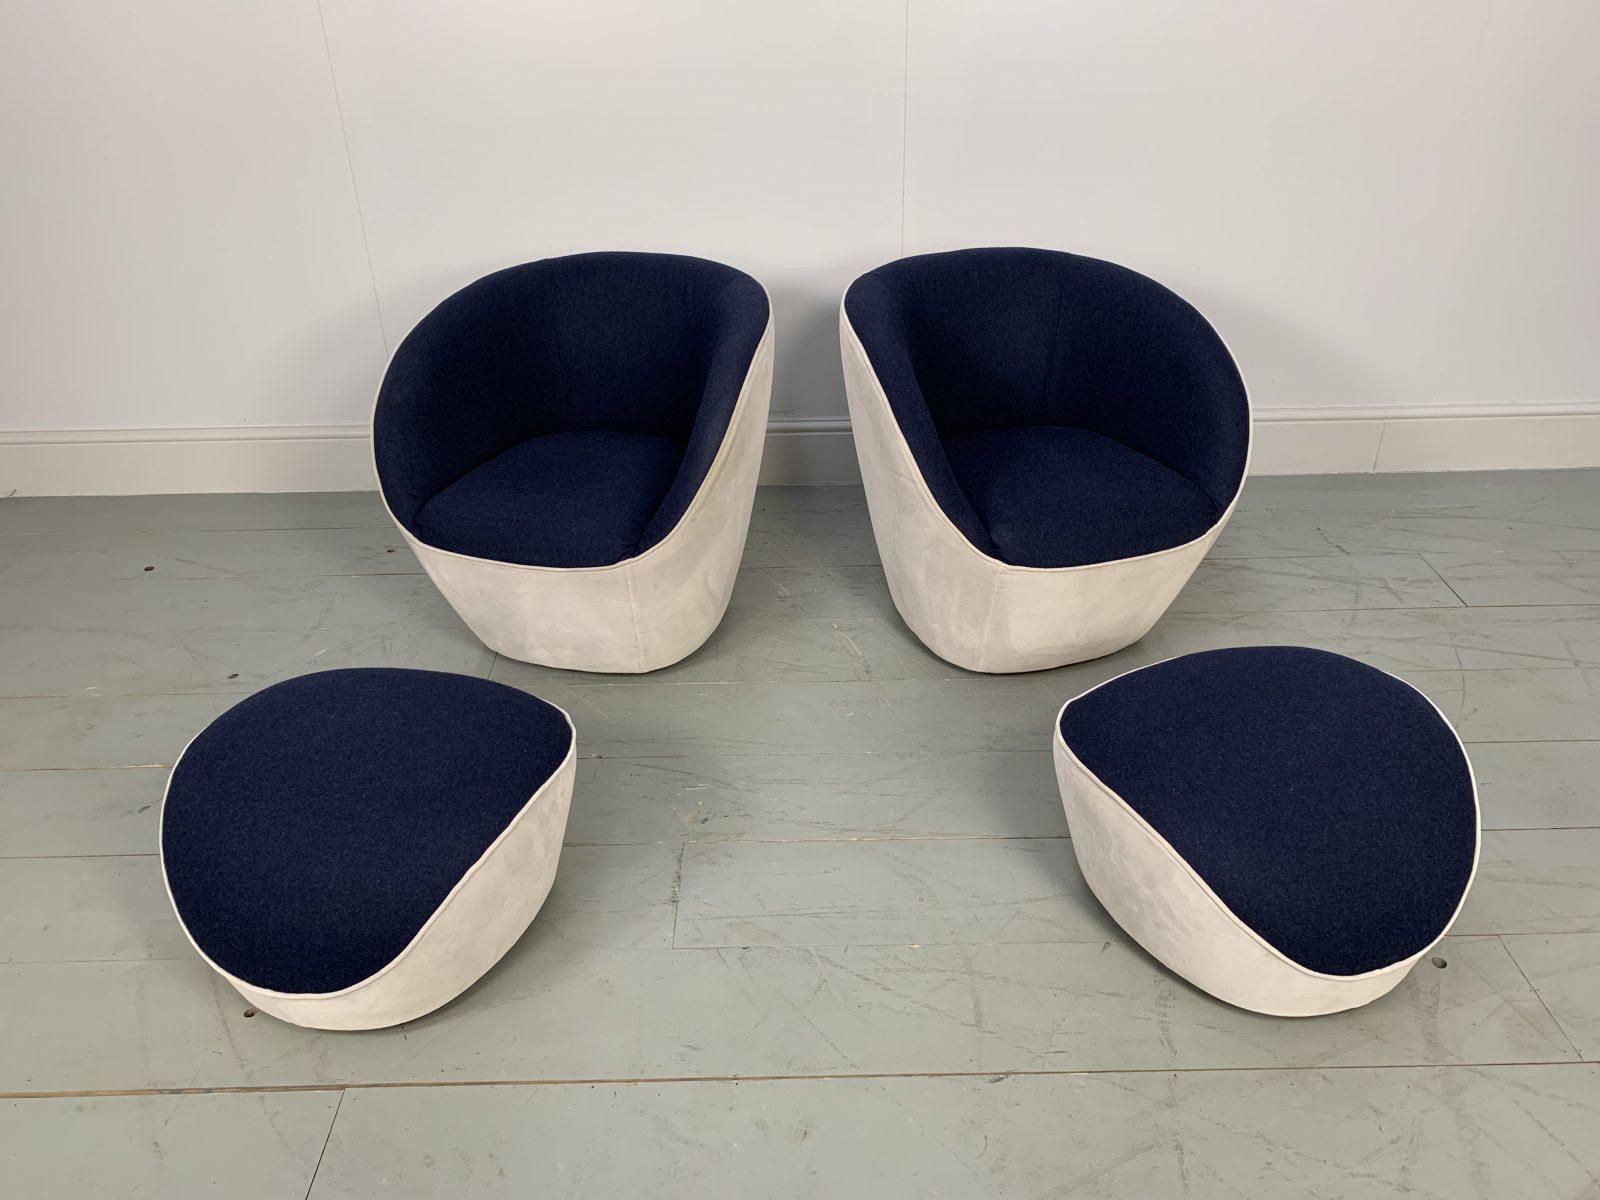 On offer on this occasion is an ultra-rare identical pair of “Edito” armchairs and ottomans from the world renown French furniture house of Roche Bobois.

As you will no doubt be aware by your interest in this Sacha Lakic masterpiece, Roche Bobois